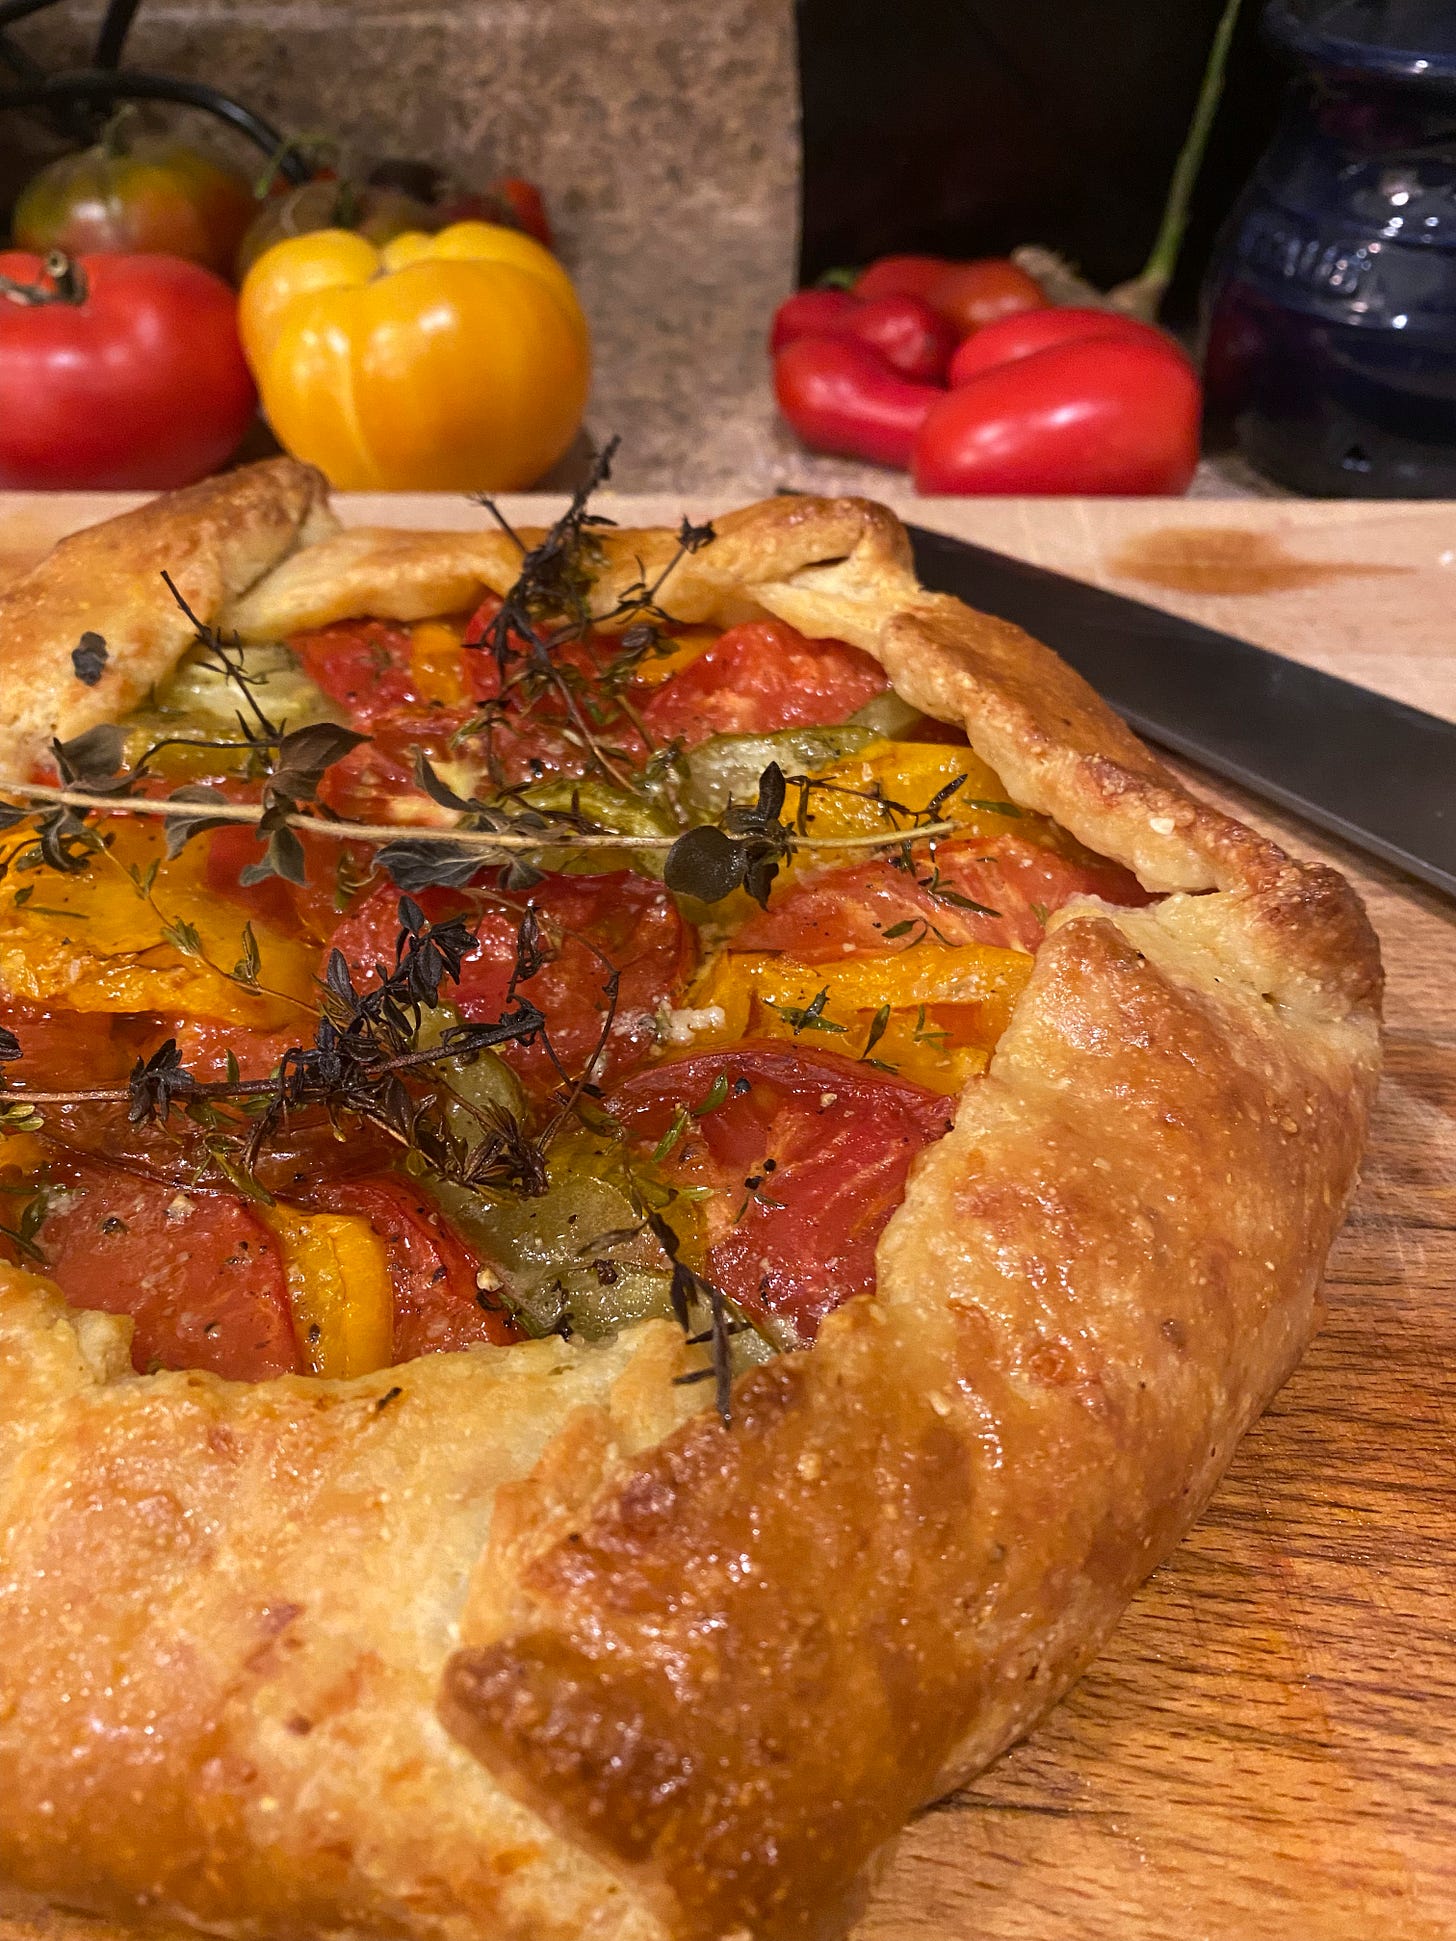 On a wooden cutting board, a golden brown crostata full of yellow, red, and green heirloom tomatoes. Sprigs of thyme, crisp from the oven, are scattered over the top. In the background a large knife rests on the board, and several whole heirloom tomatoes are visible.